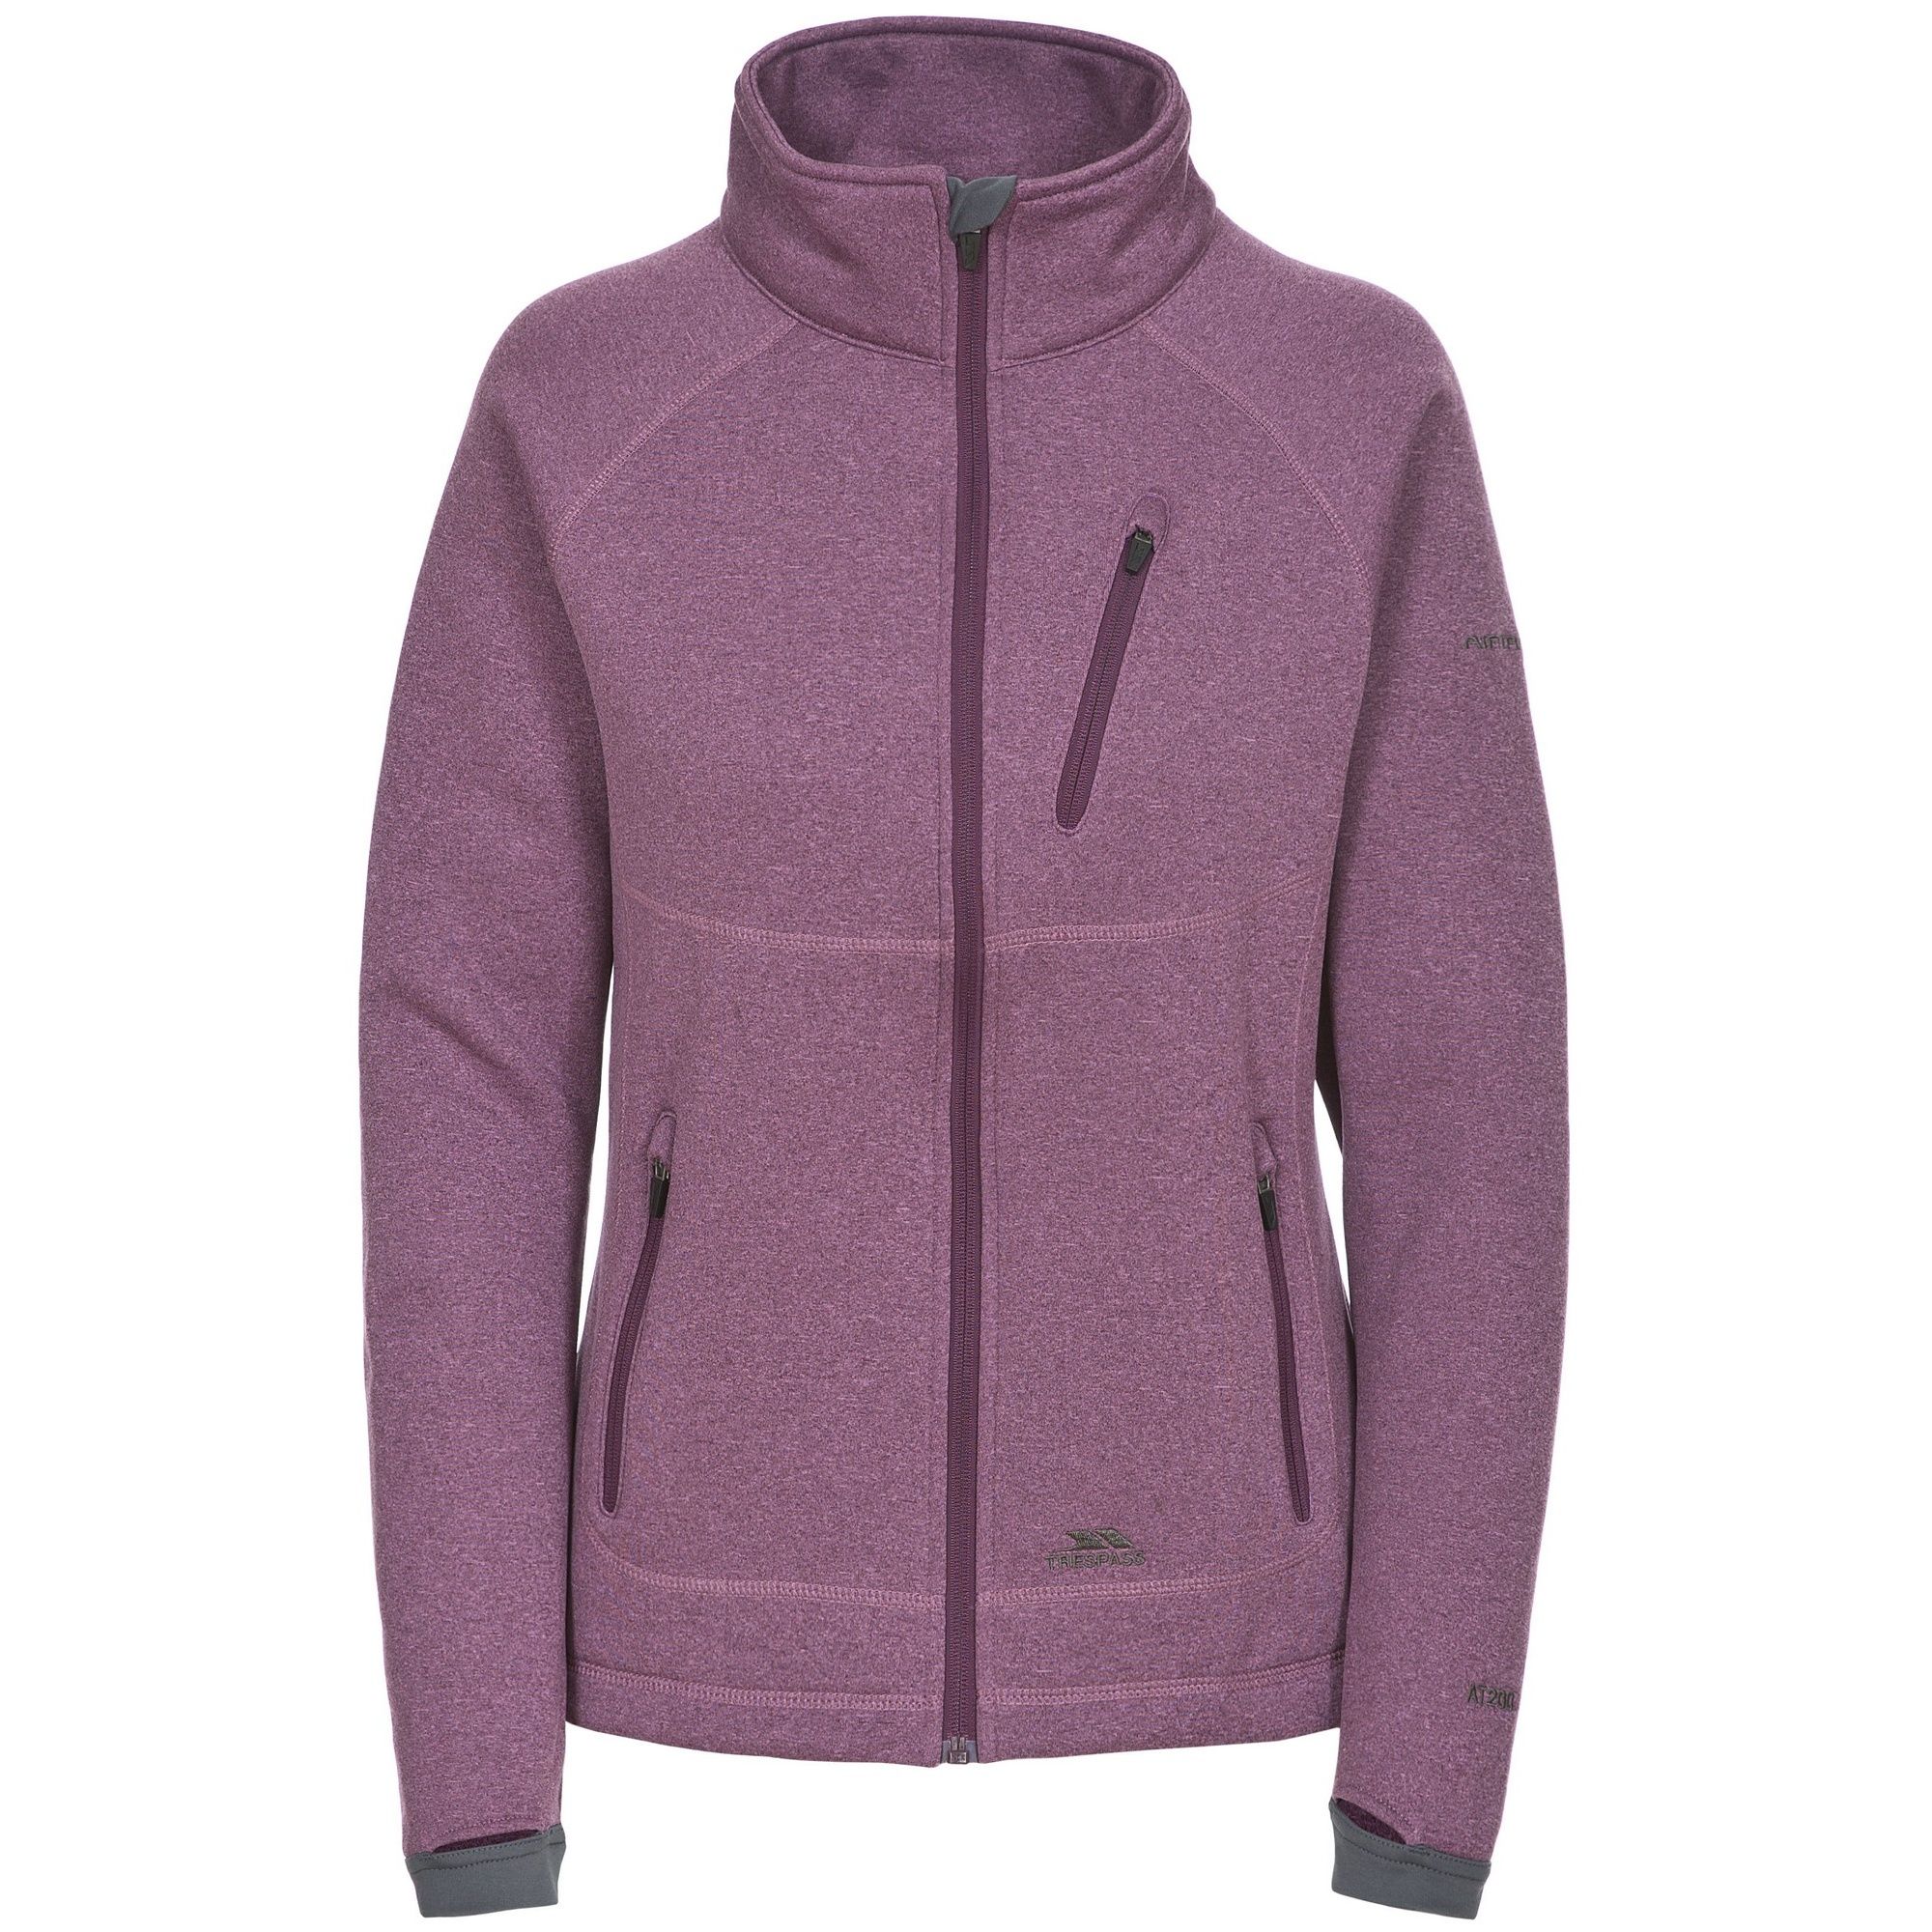 Jersey melange. Brushed back fleece. Low profile zips. Full front zip. Stretch fabric chin guard. 3 zipped pockets. Stretch fabric cuff with thumb hole. Airtrap. 100% Polyester. Trespass Womens Chest Sizing (approx): XS/8 - 32in/81cm, S/10 - 34in/86cm, M/12 - 36in/91.4cm, L/14 - 38in/96.5cm, XL/16 - 40in/101.5cm, XXL/18 - 42in/106.5cm.